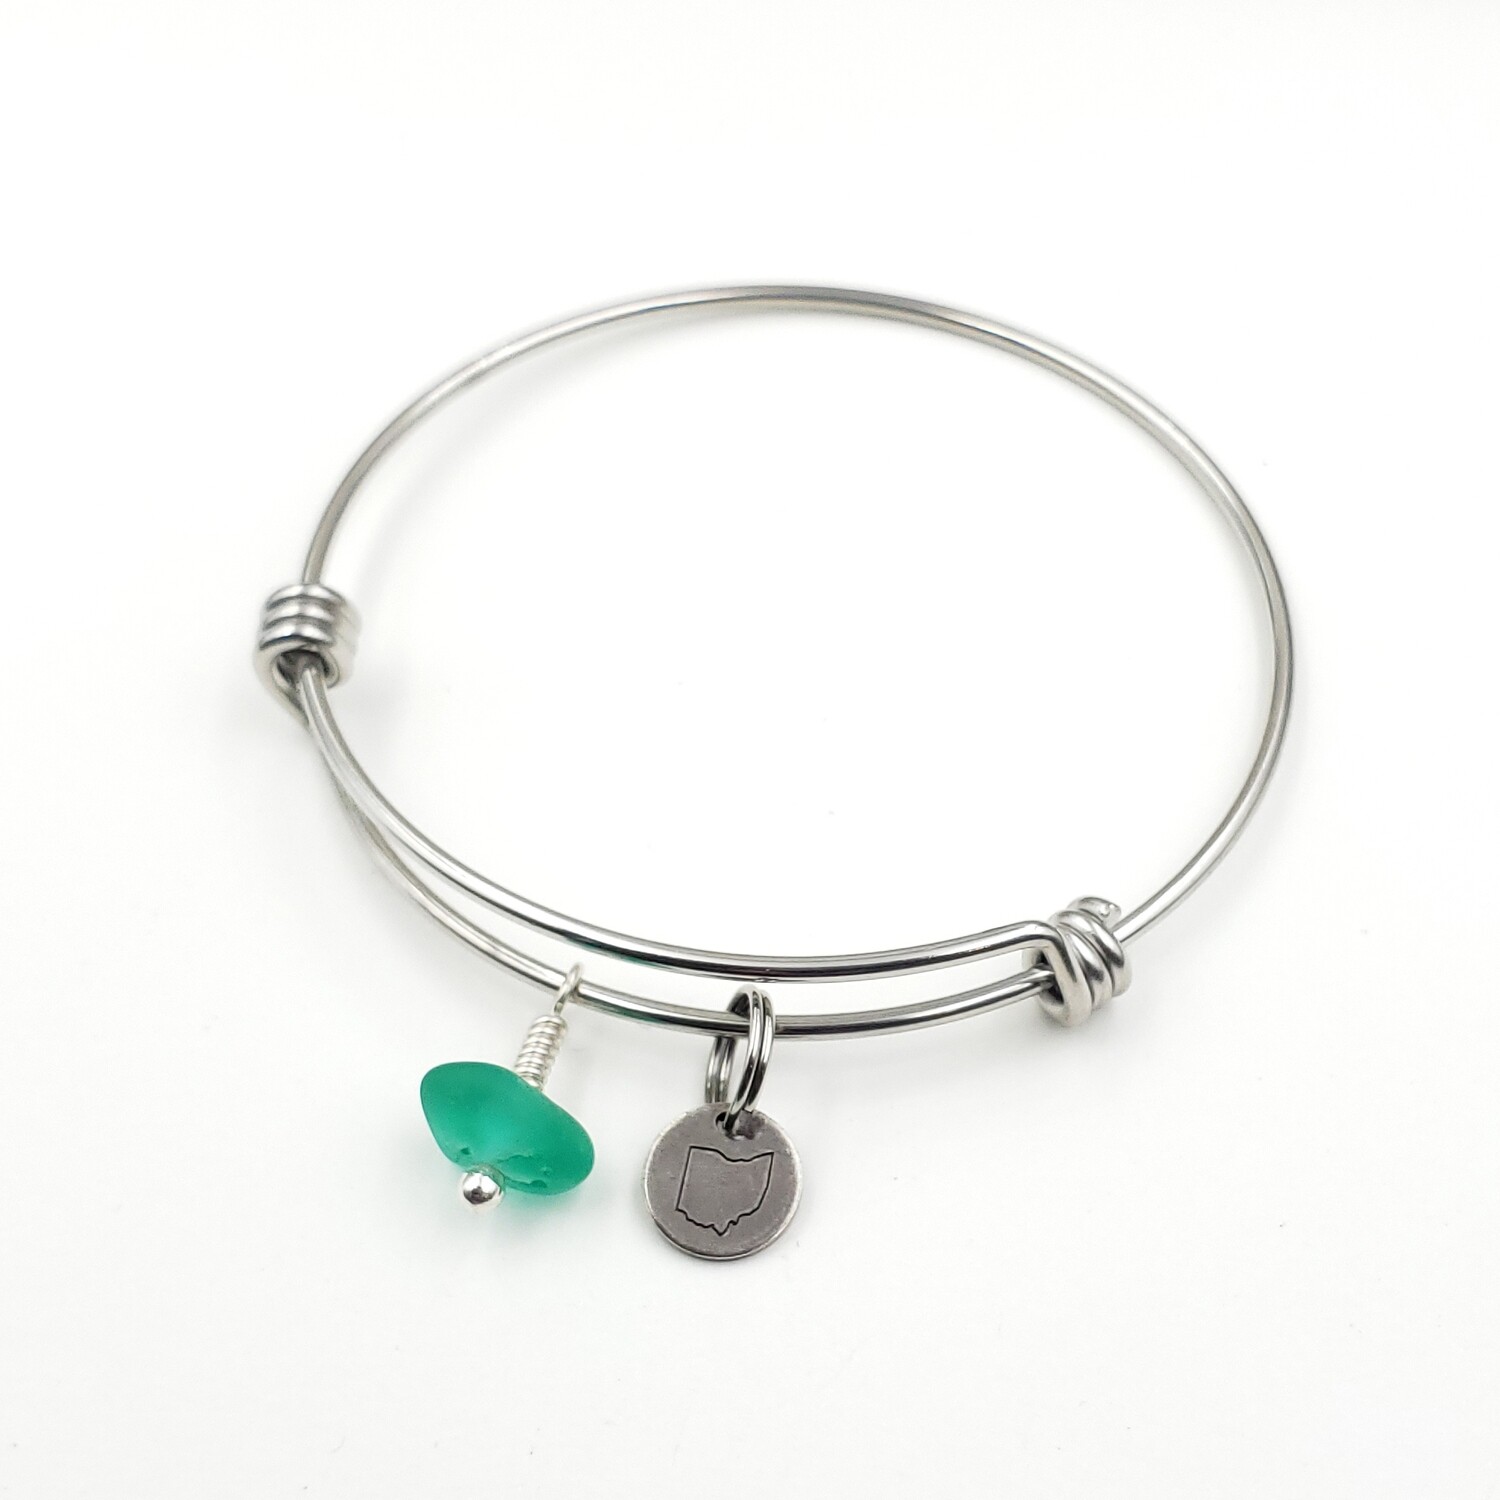 Bangle Bracelet with Stamped State of Ohio Charm and teal green Lake Erie Beach Glass